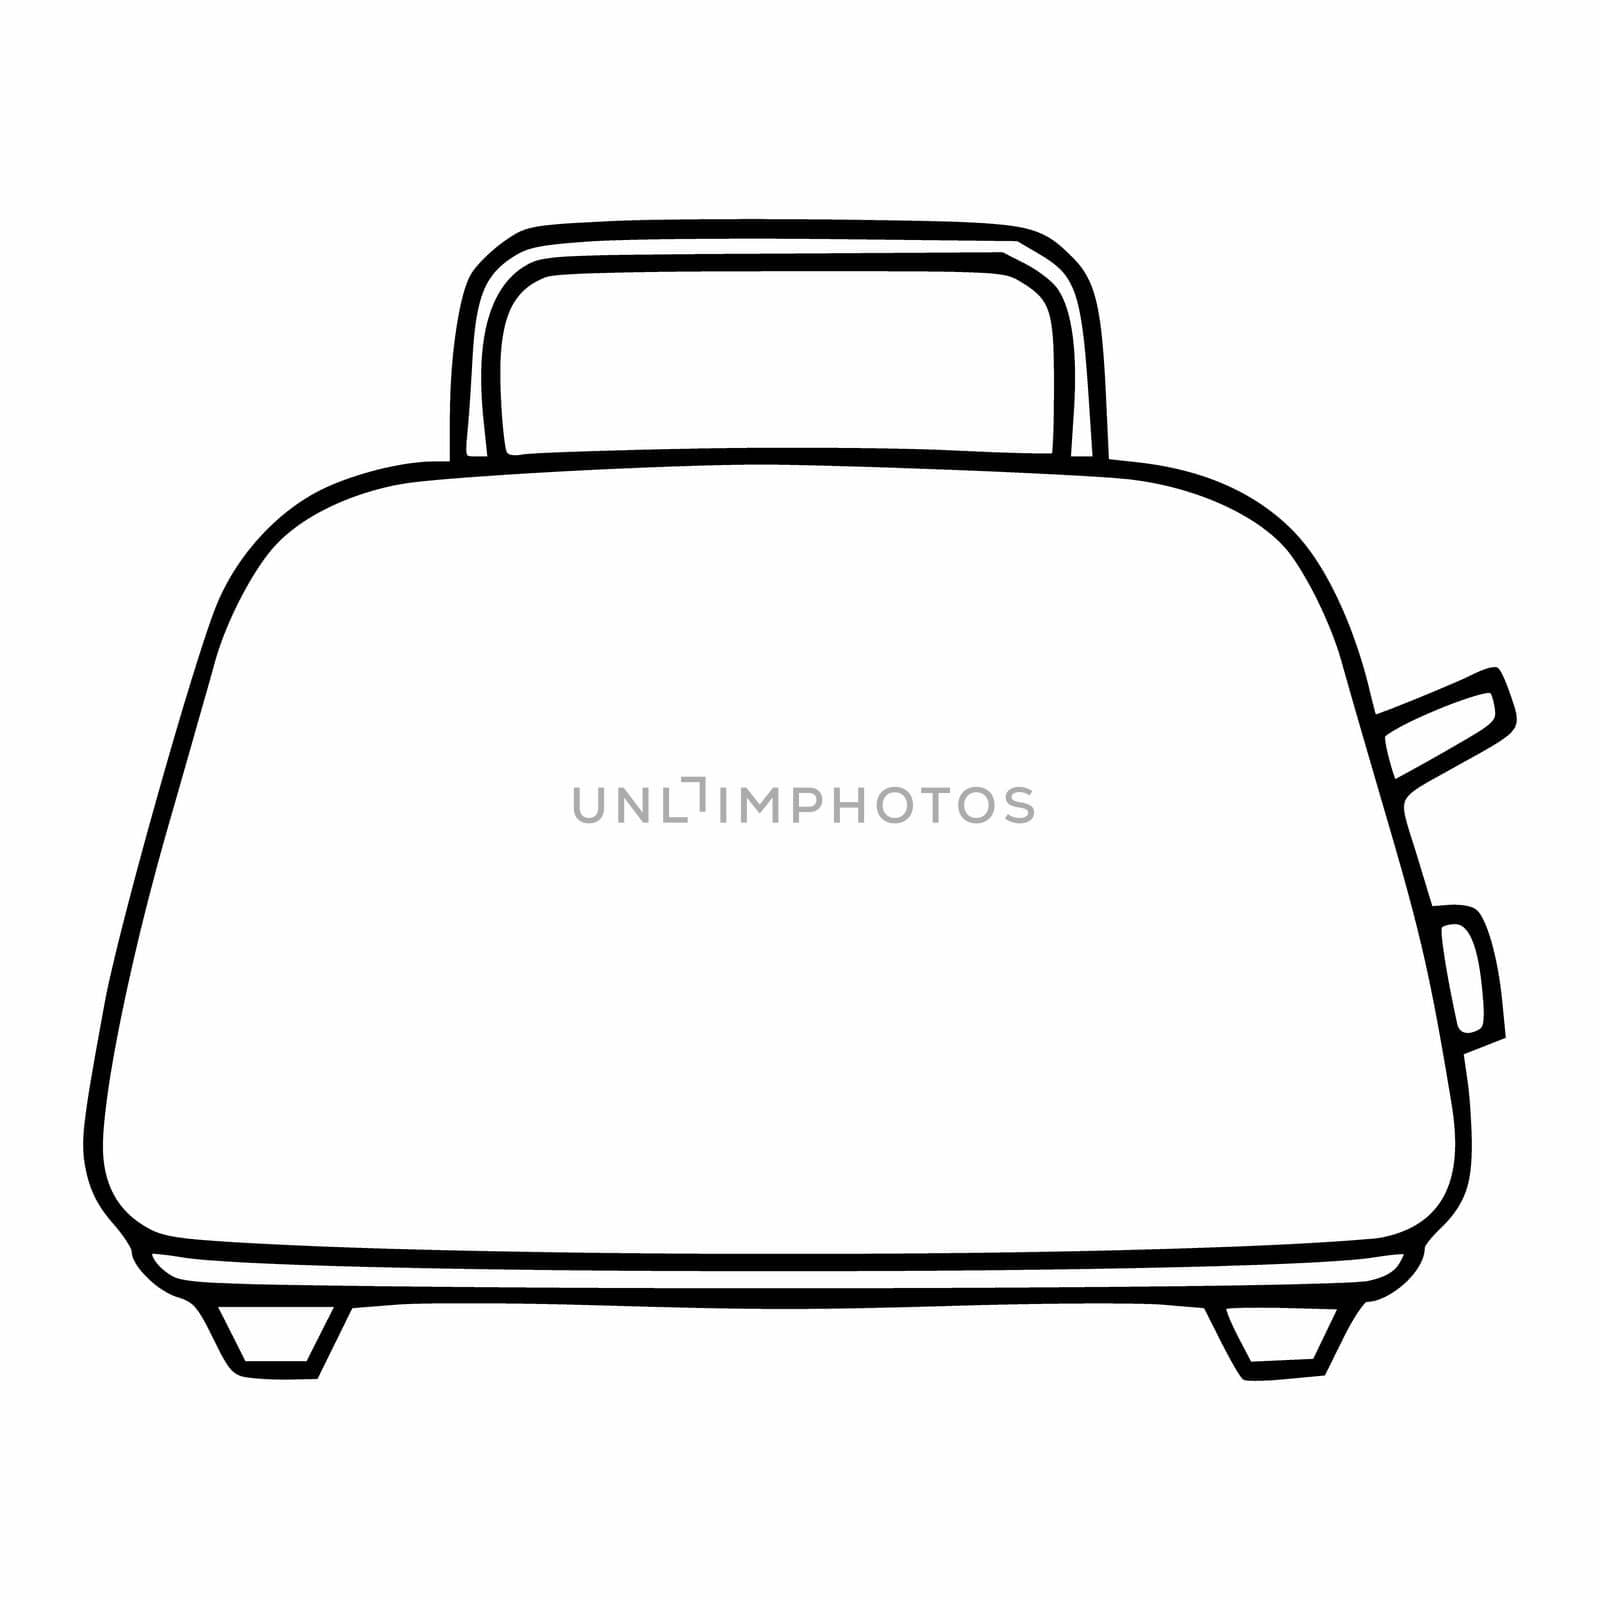 Toaster for frying bread. Vector icon of the toaster. Kitchen electric appliance.